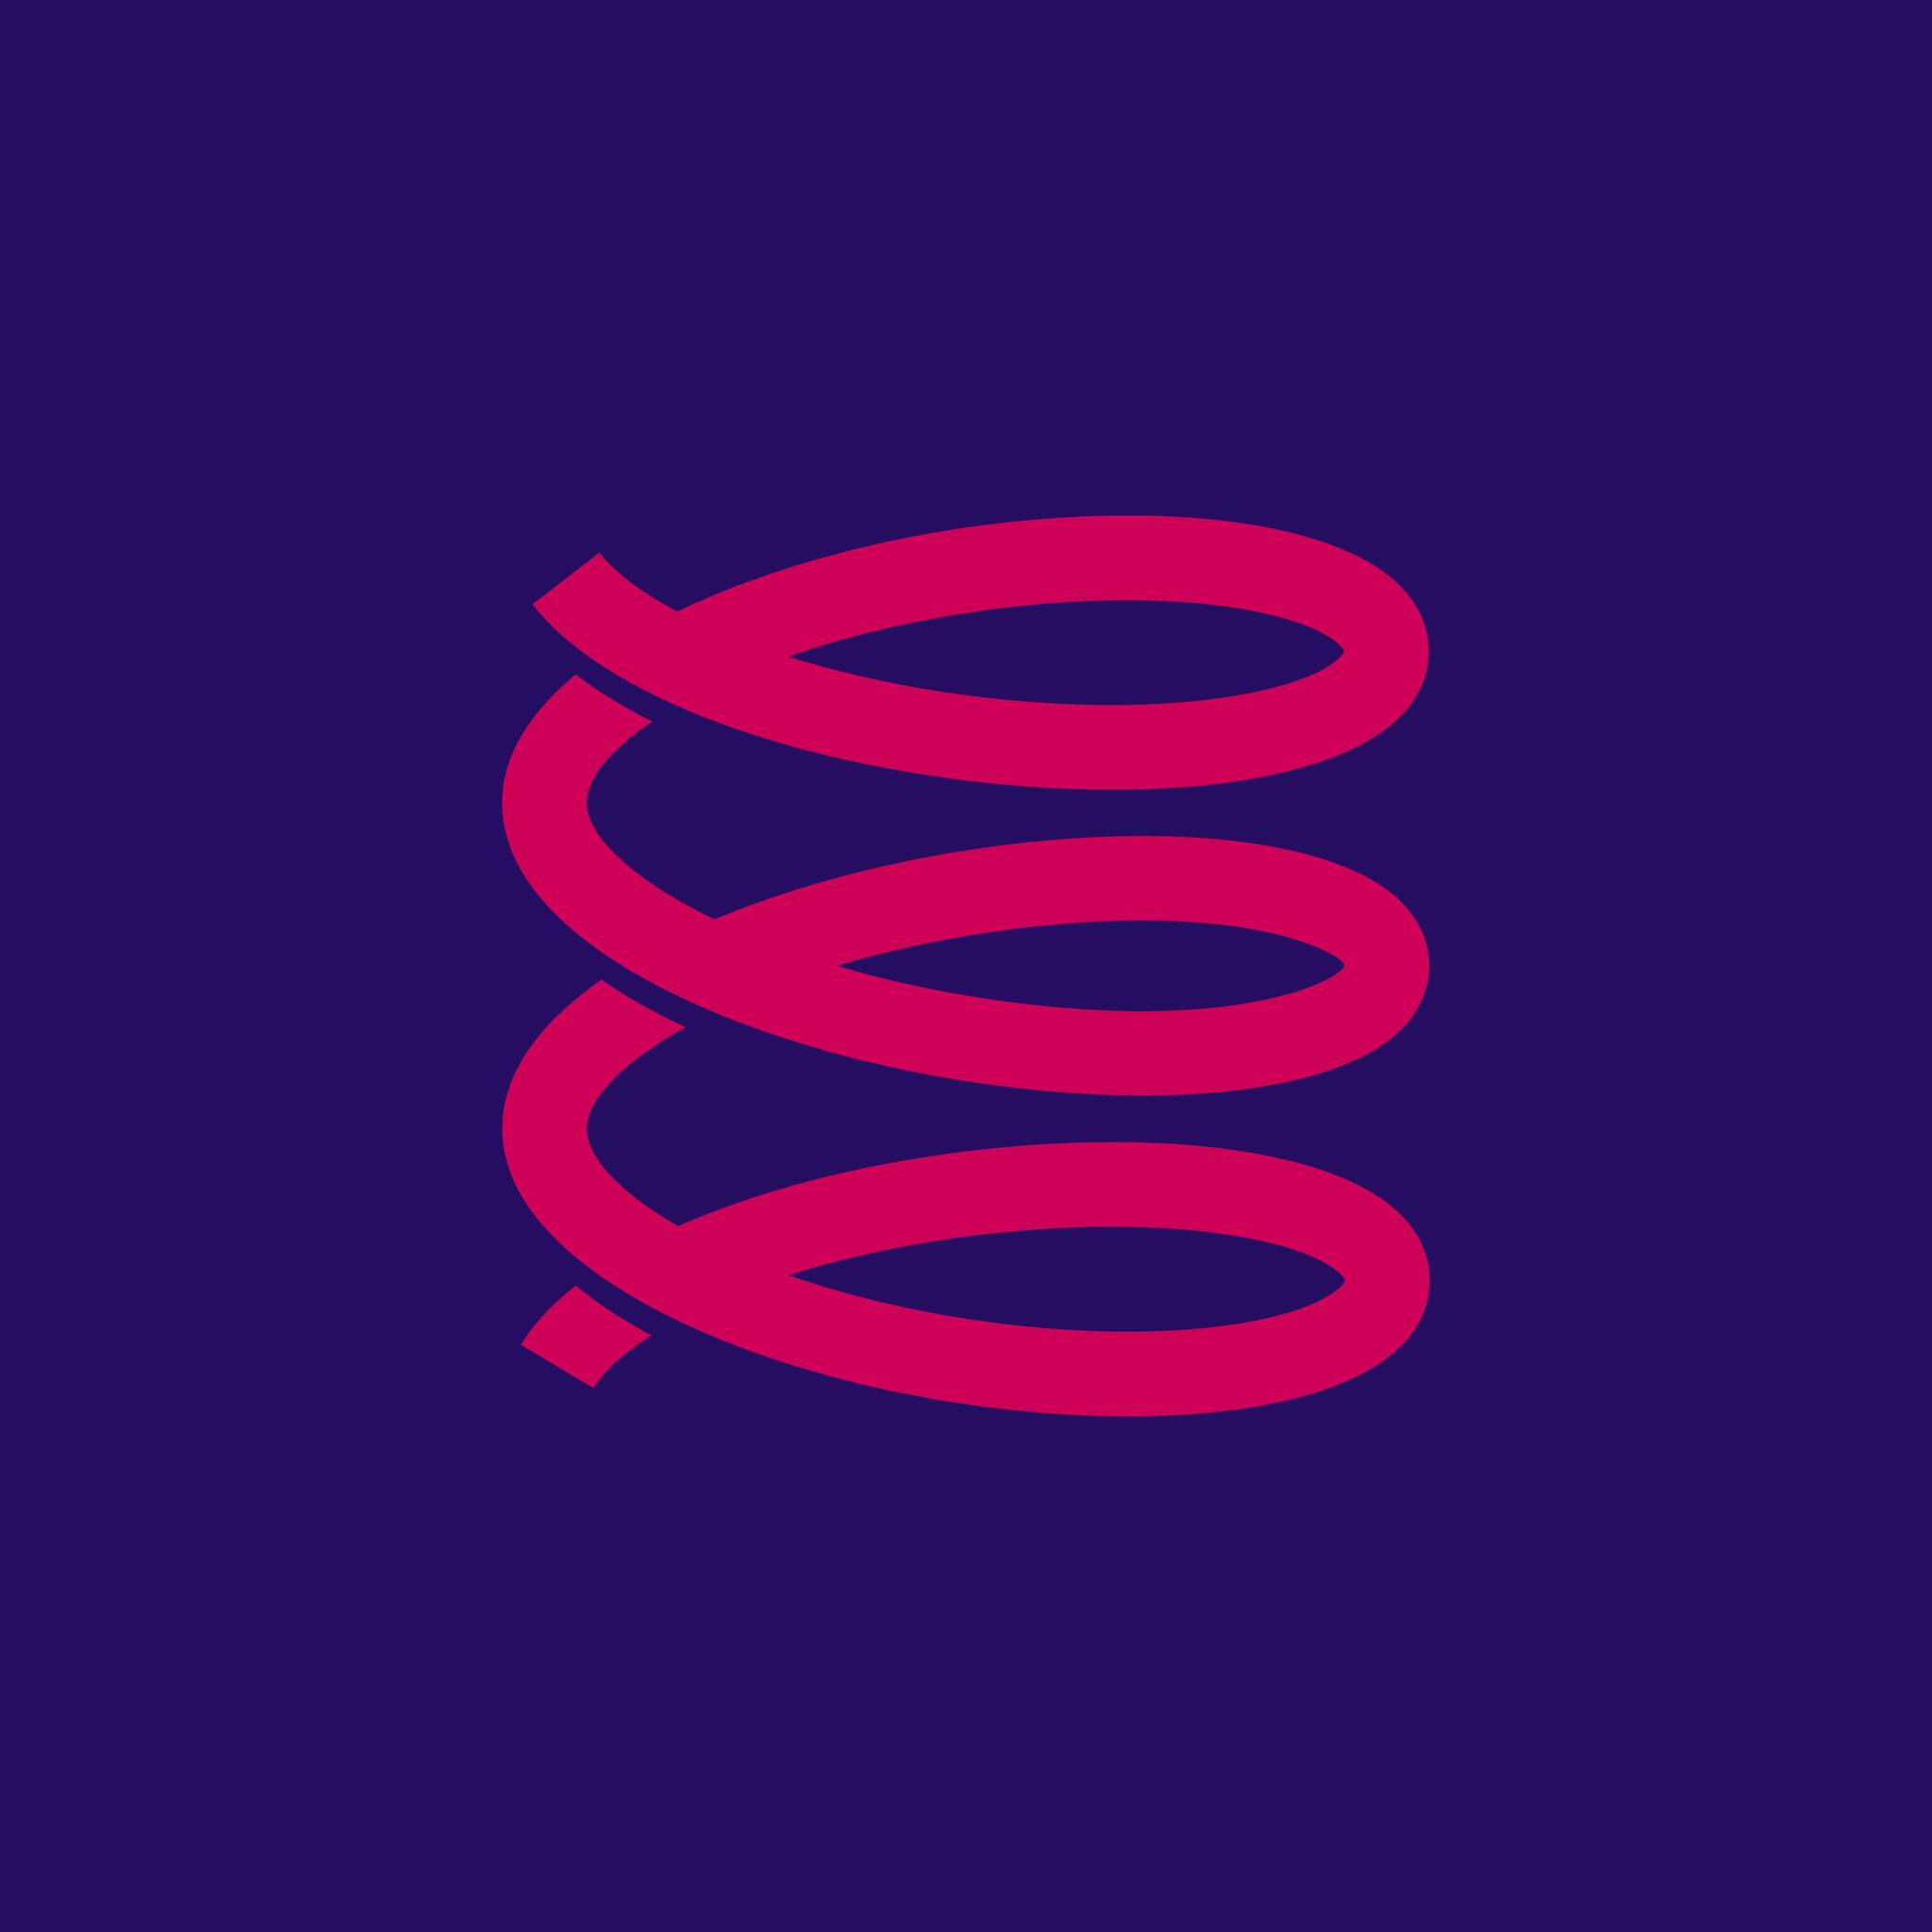 Elevator Spaces logo with purple background and magenta spring.